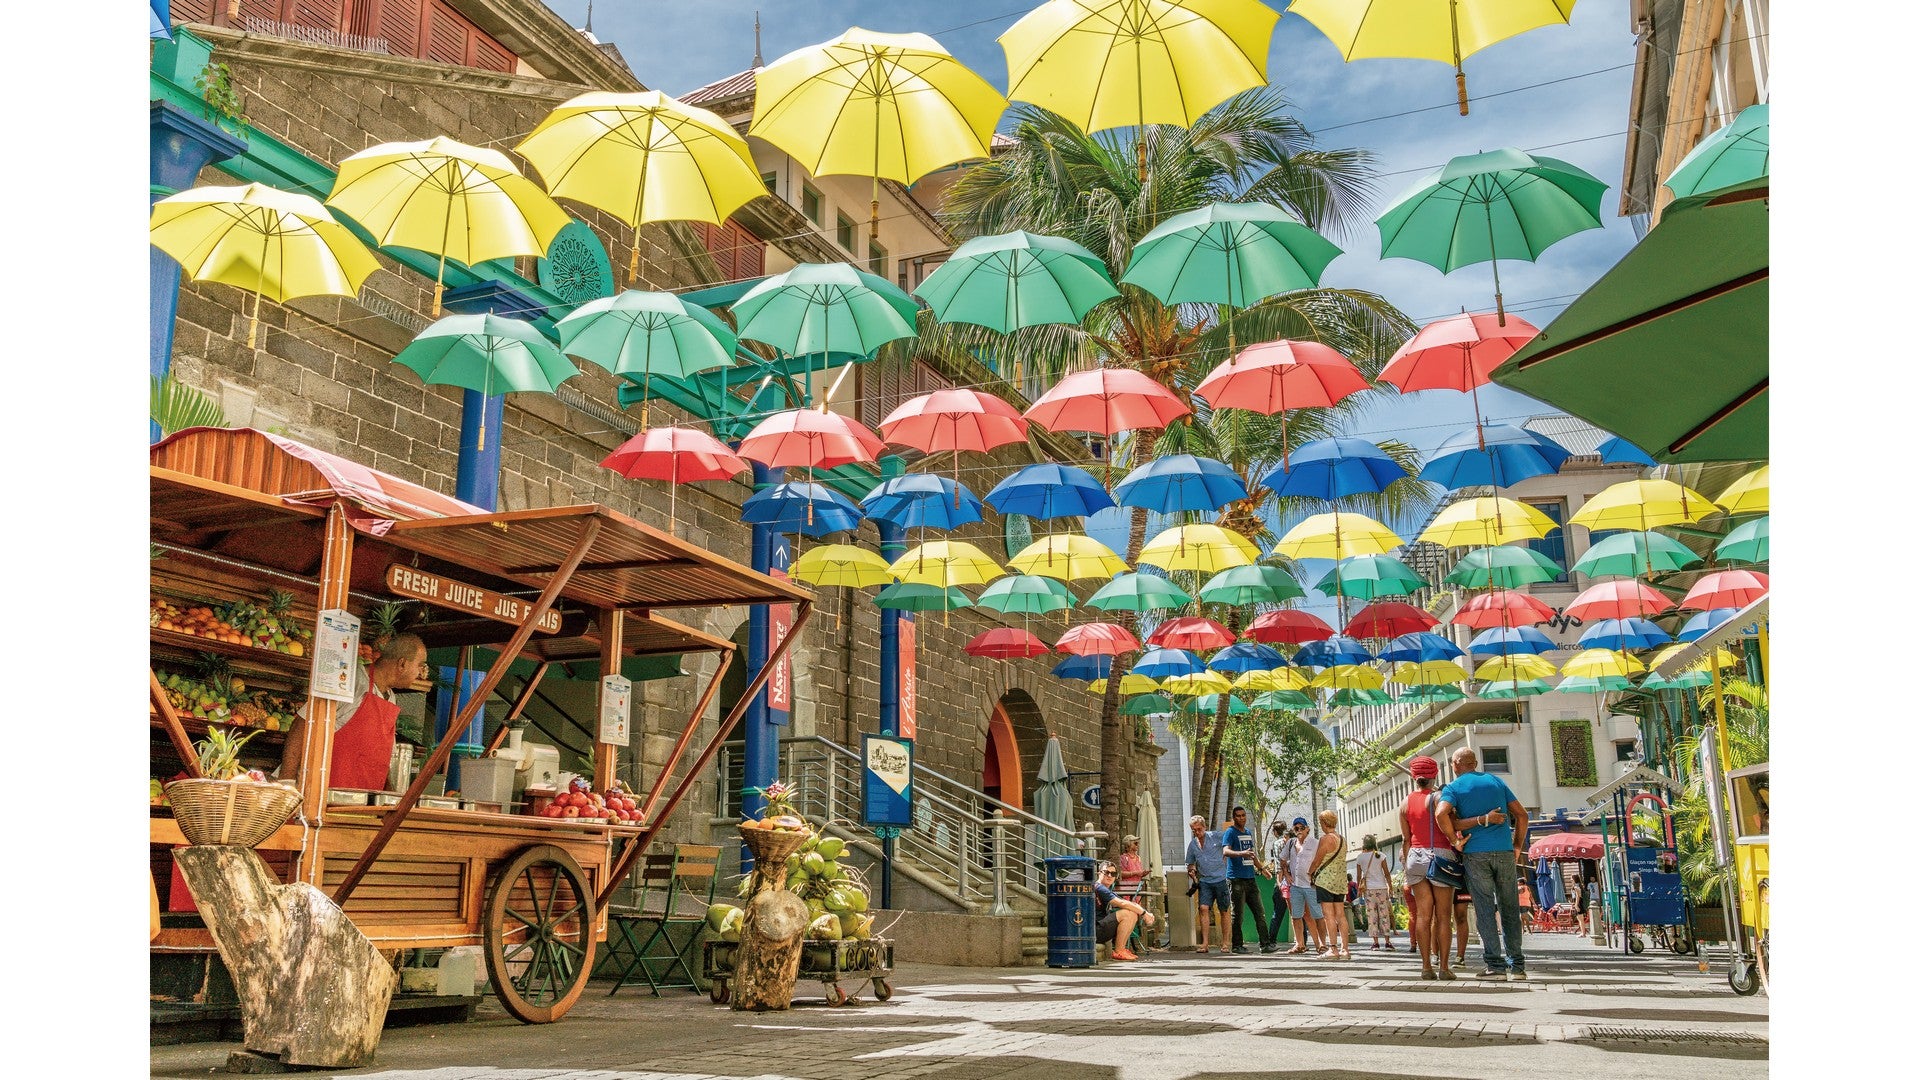 Mauritius is entering the second phase of its reopening to tourists after the pandemic